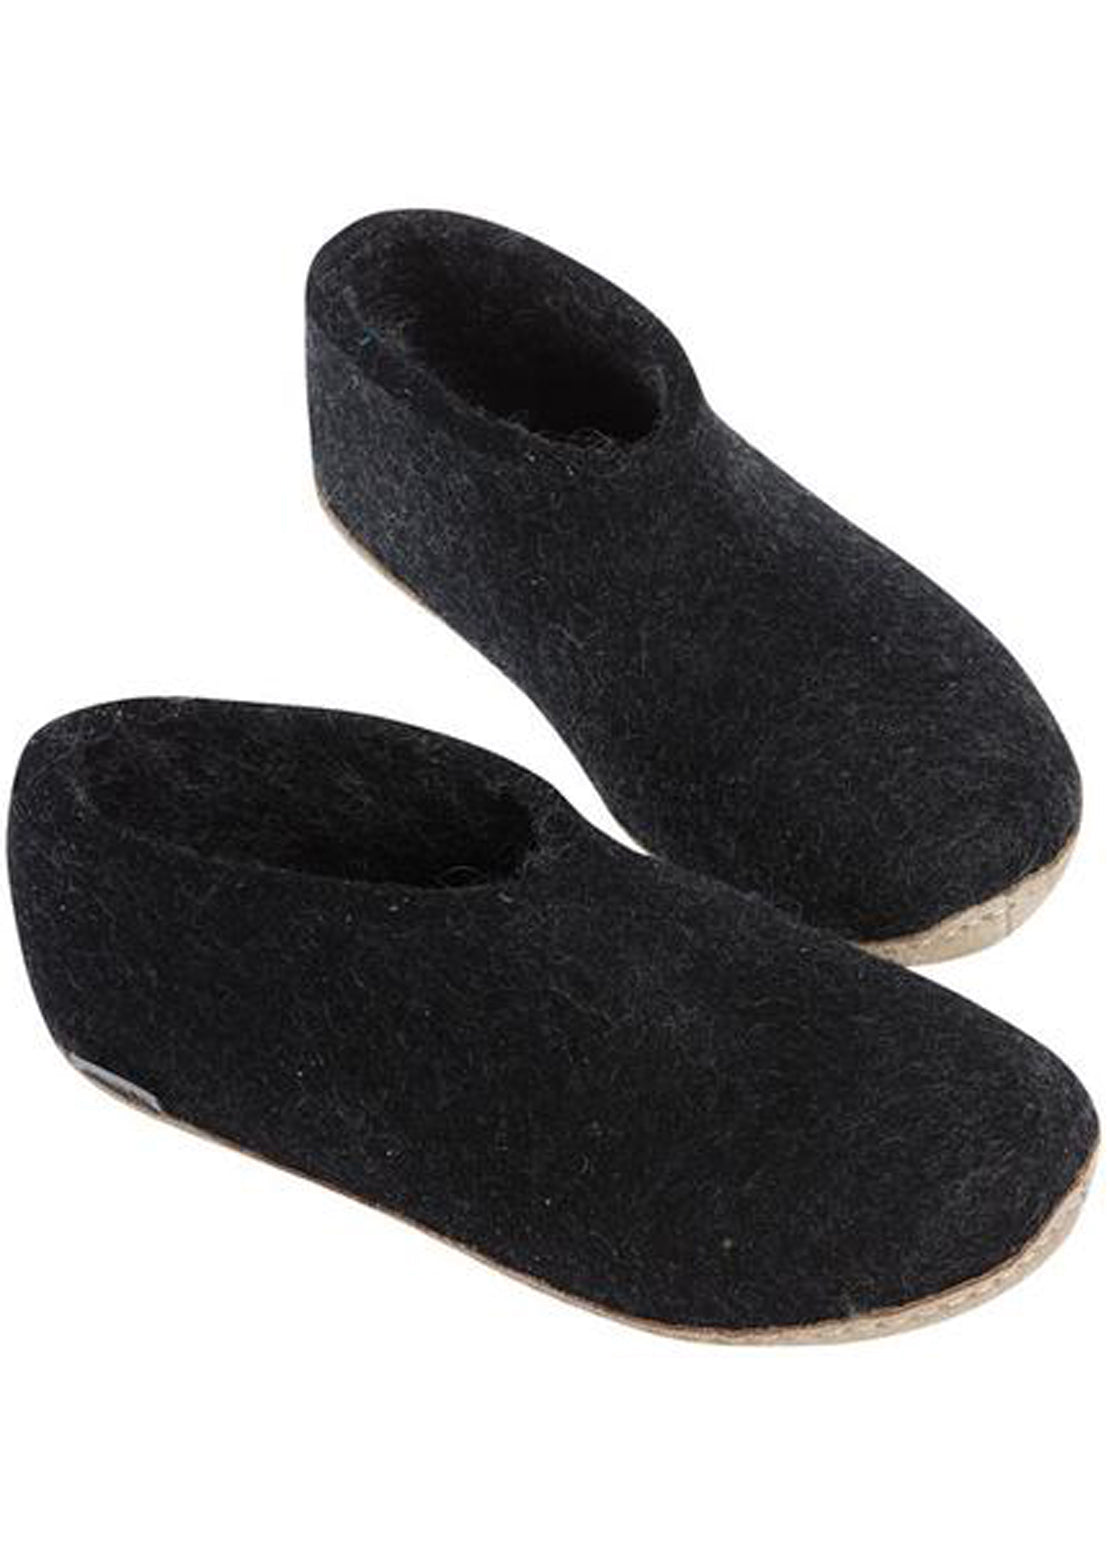 Glerups Unisex Leather Sole Slipper Shoes Charcoal